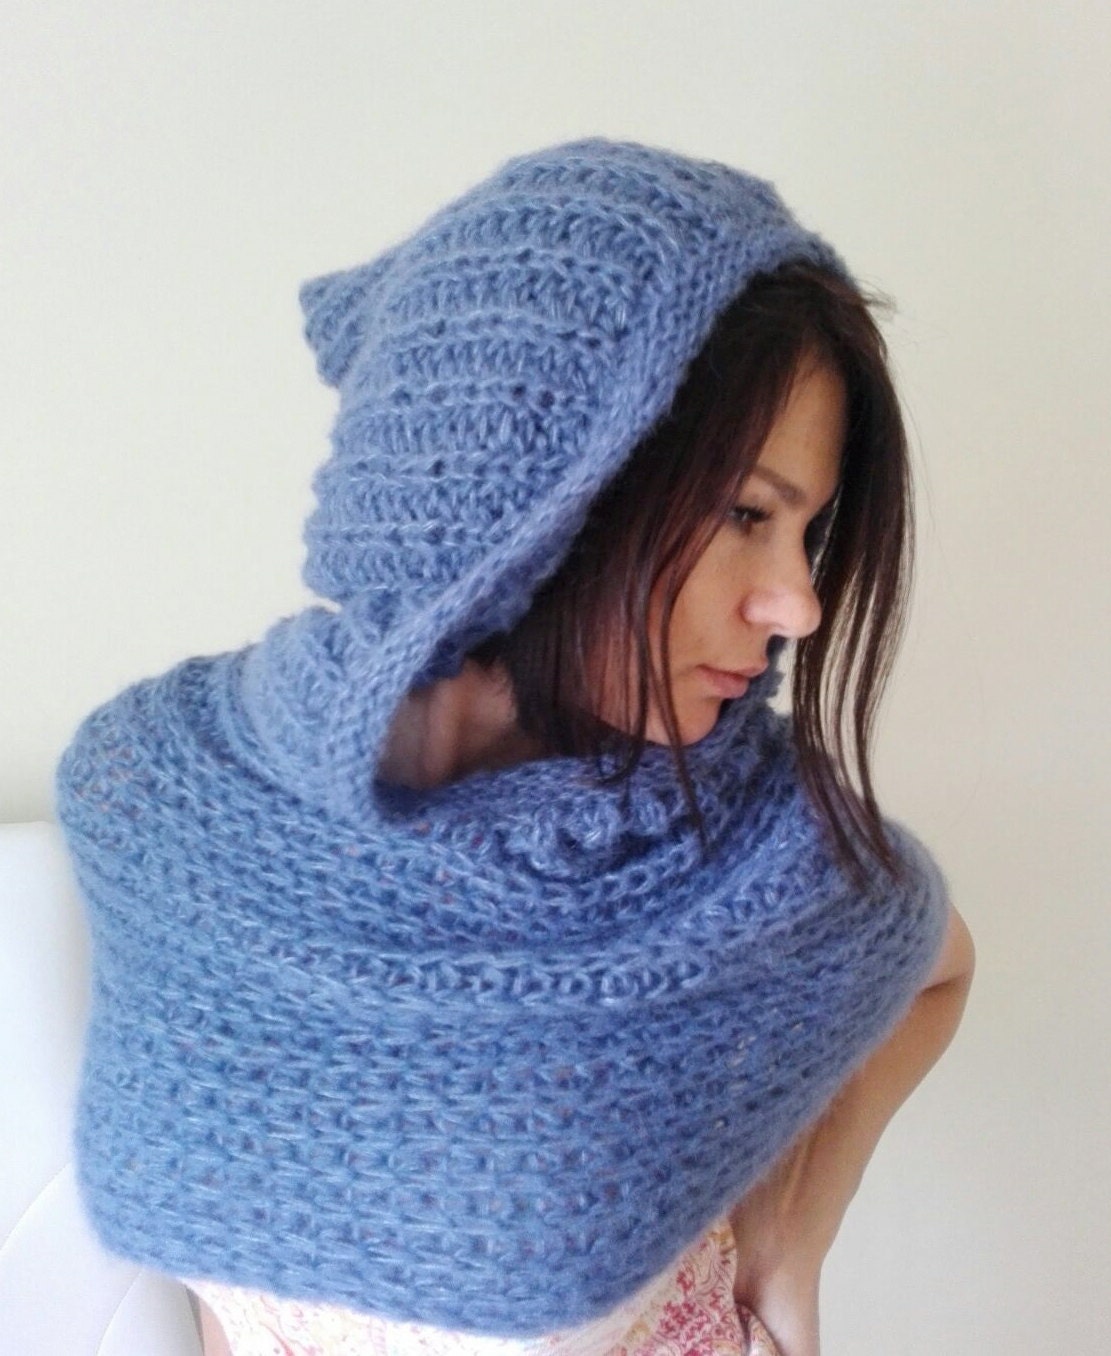 Denim Blue Knitted Neck Warmer with Hood / Oversized Hooded